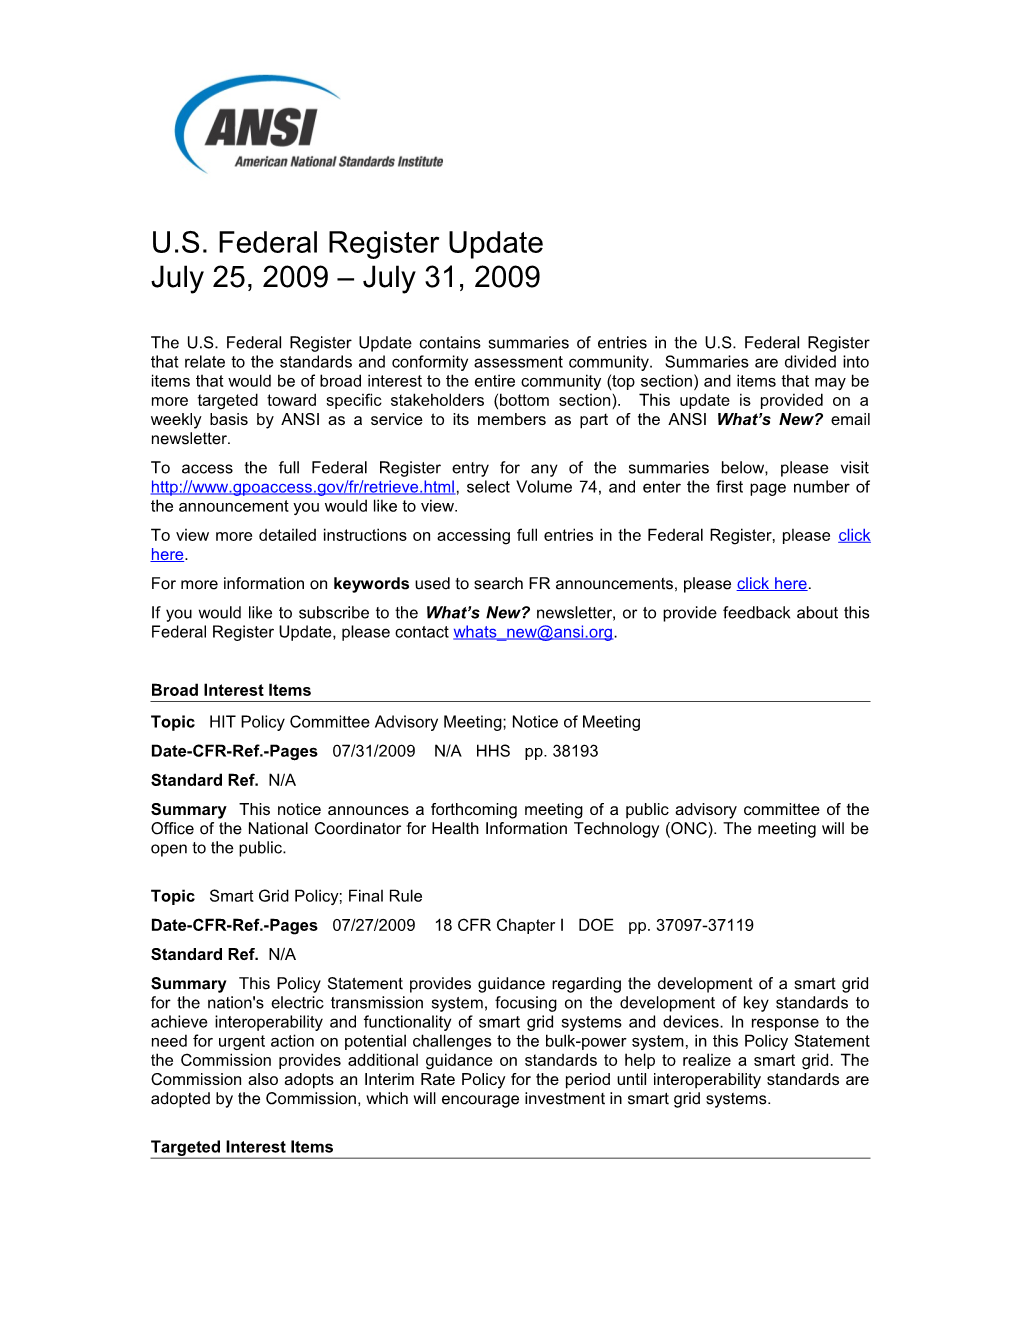 Standards and Trade Related Notices from the U.S. Federal Register, 7.31.09